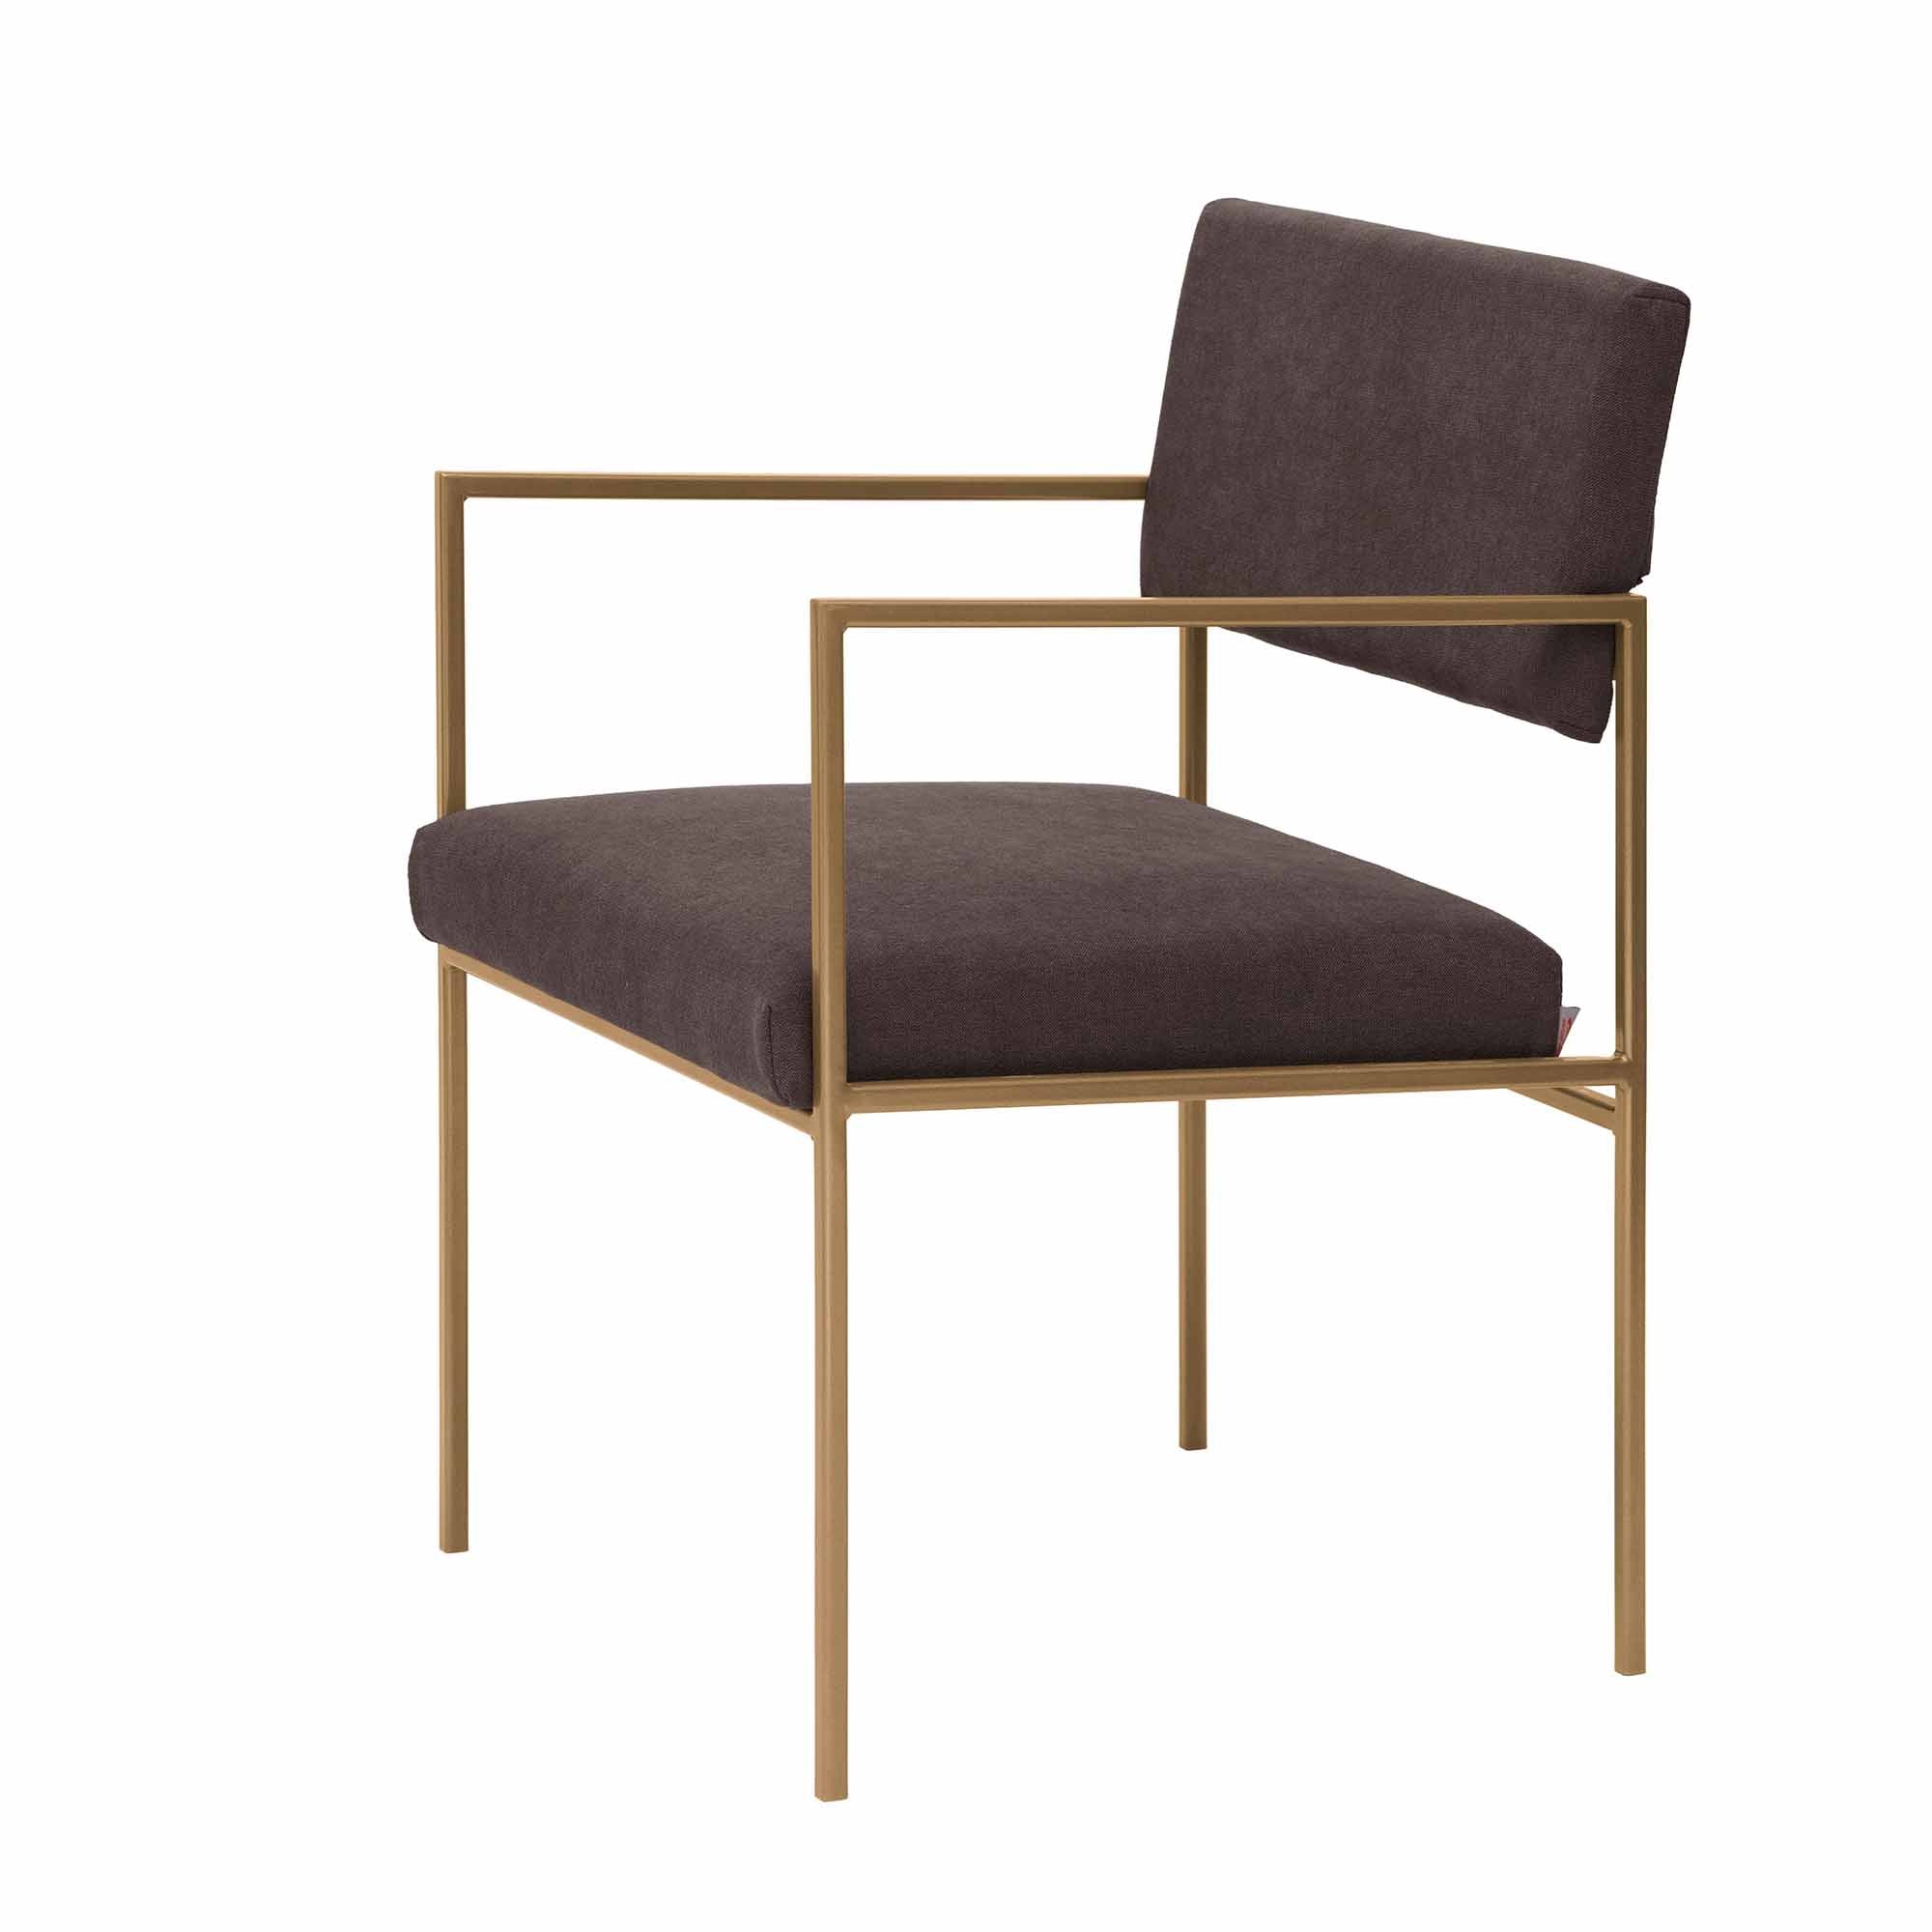 CUBE Armchair, Powder-Coated Steel Frame brown fabric, yellow frame half-side view